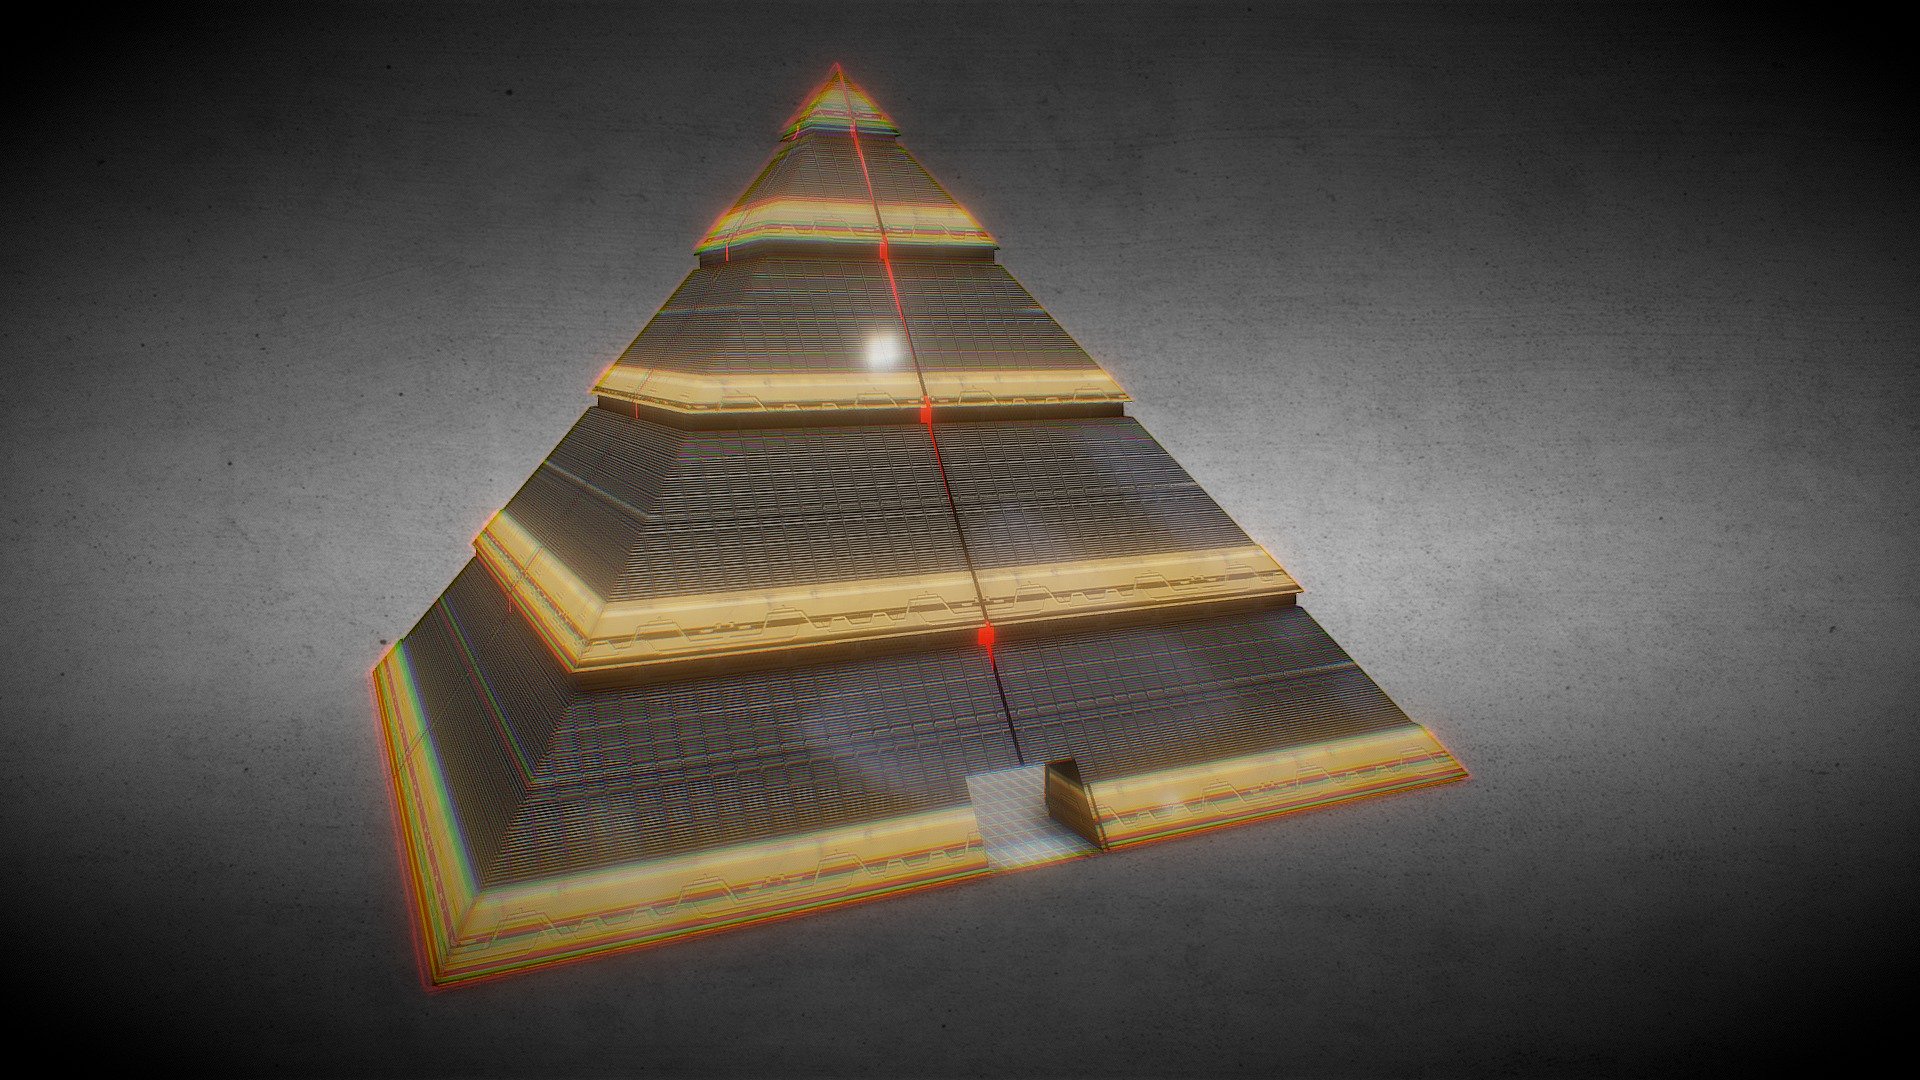 https://www.youtube.com/watch?v=p1lyzUafQ9s

Get the entire Unreal Engine Project

Modern Sci-fi Pyramid structure

 - Sci-fi Pyramid - NeoEgypt - Buy Royalty Free 3D model by OmegaRedZA 3d model